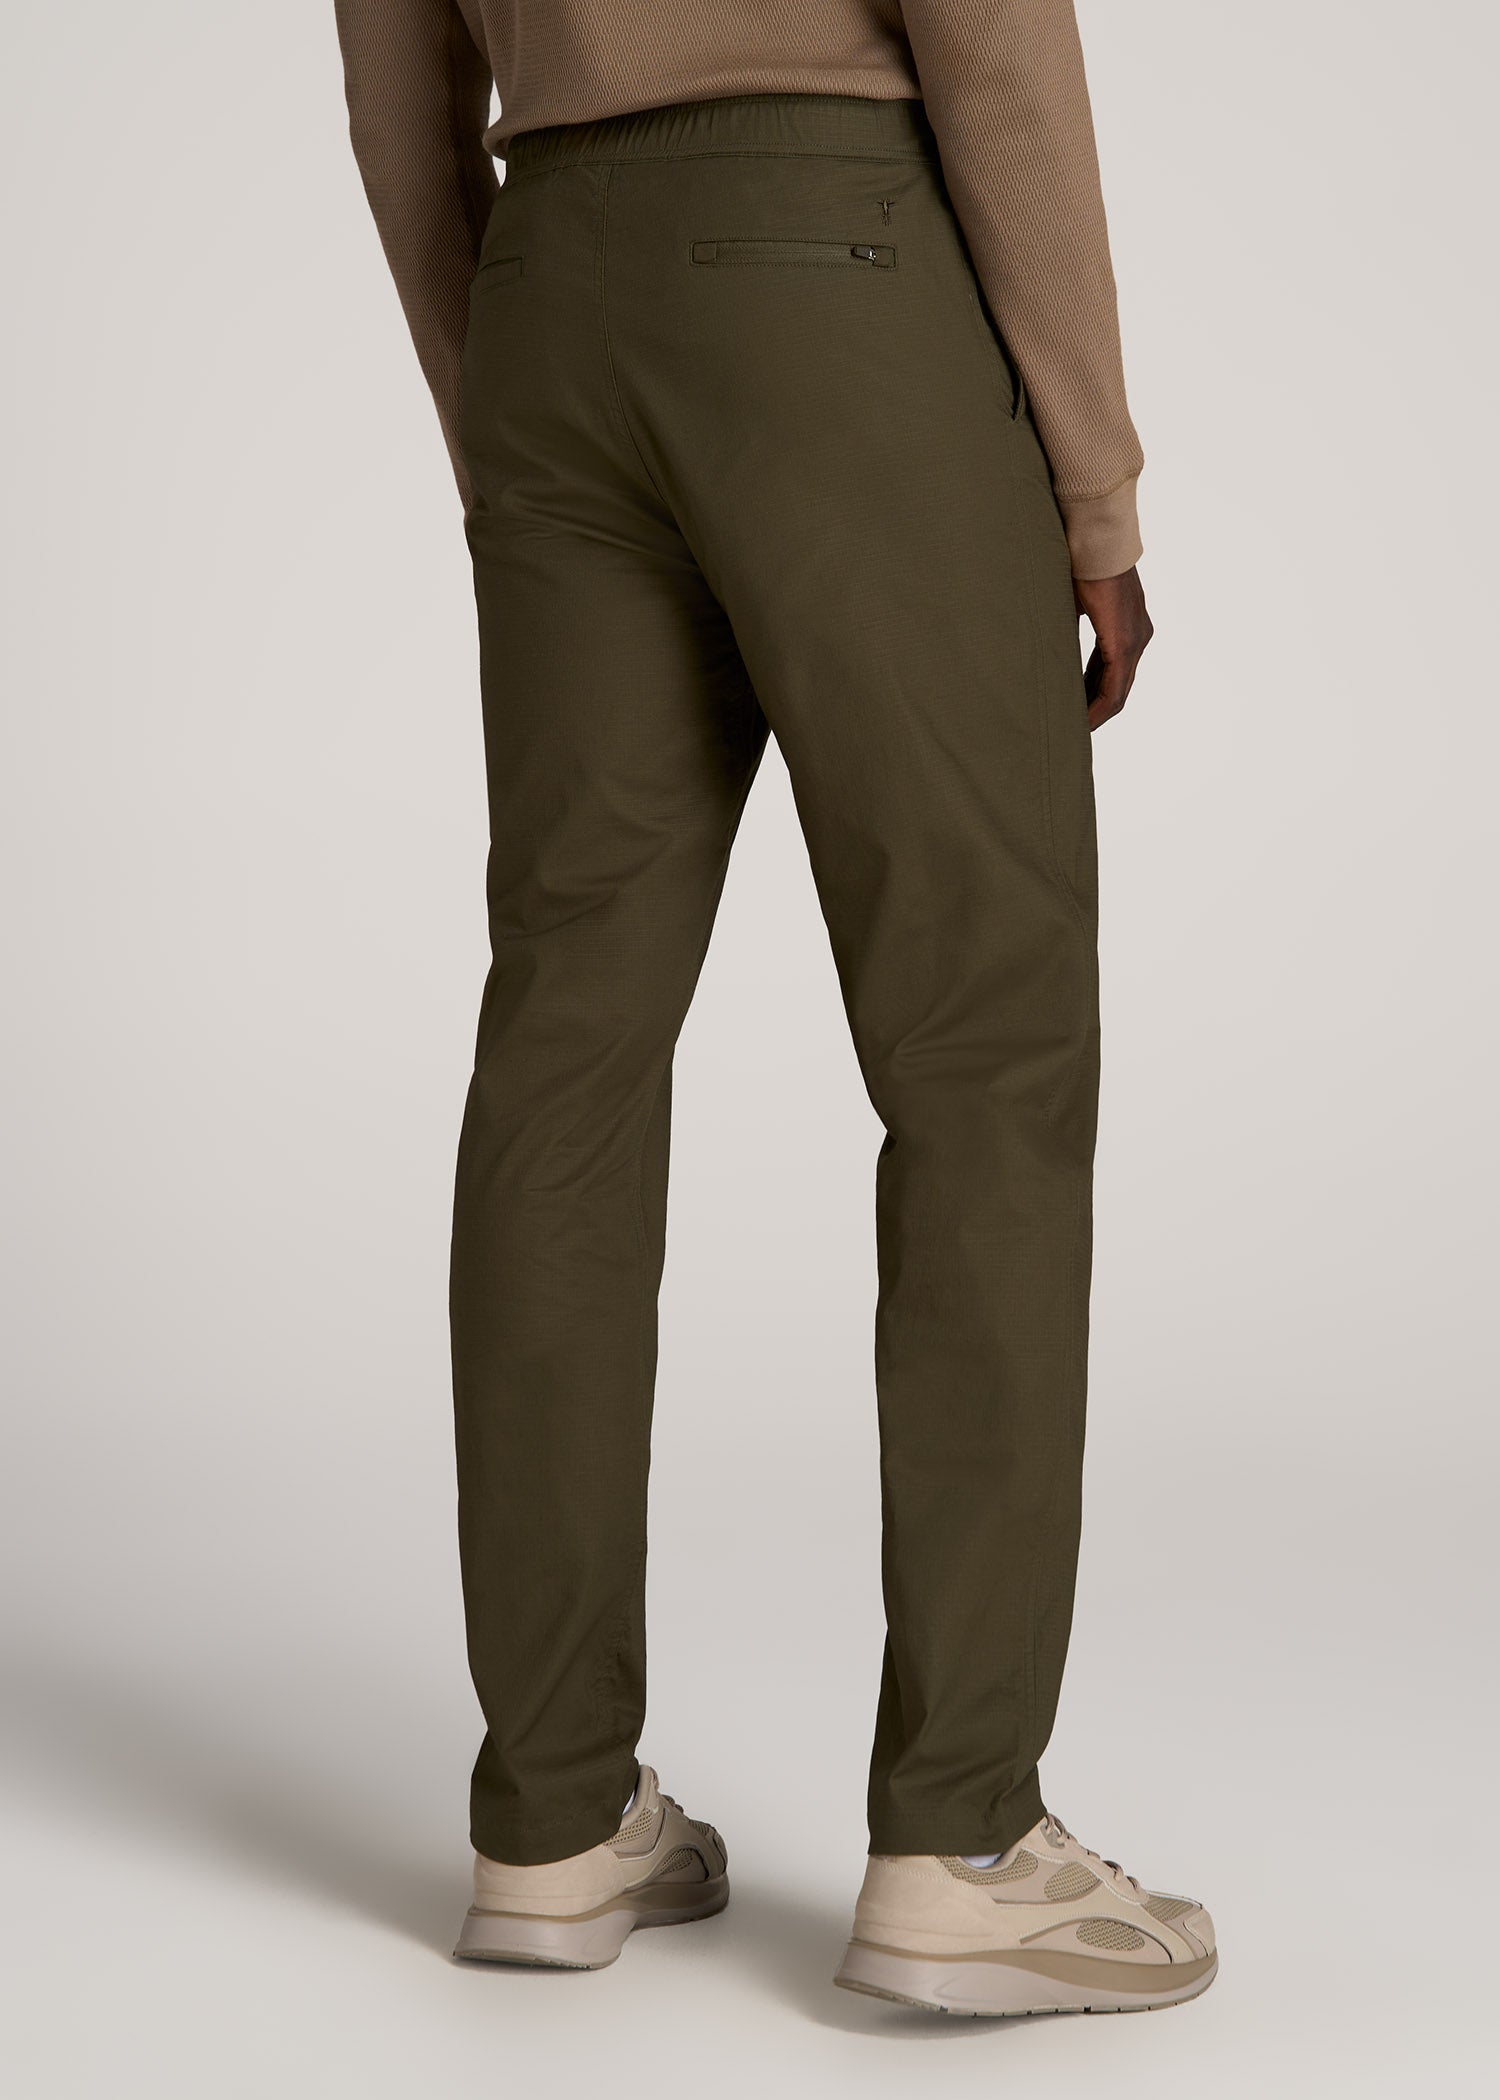 Tapered-Fit Ripstop Pants for Tall Men in Oregano S / Tall / Oregano